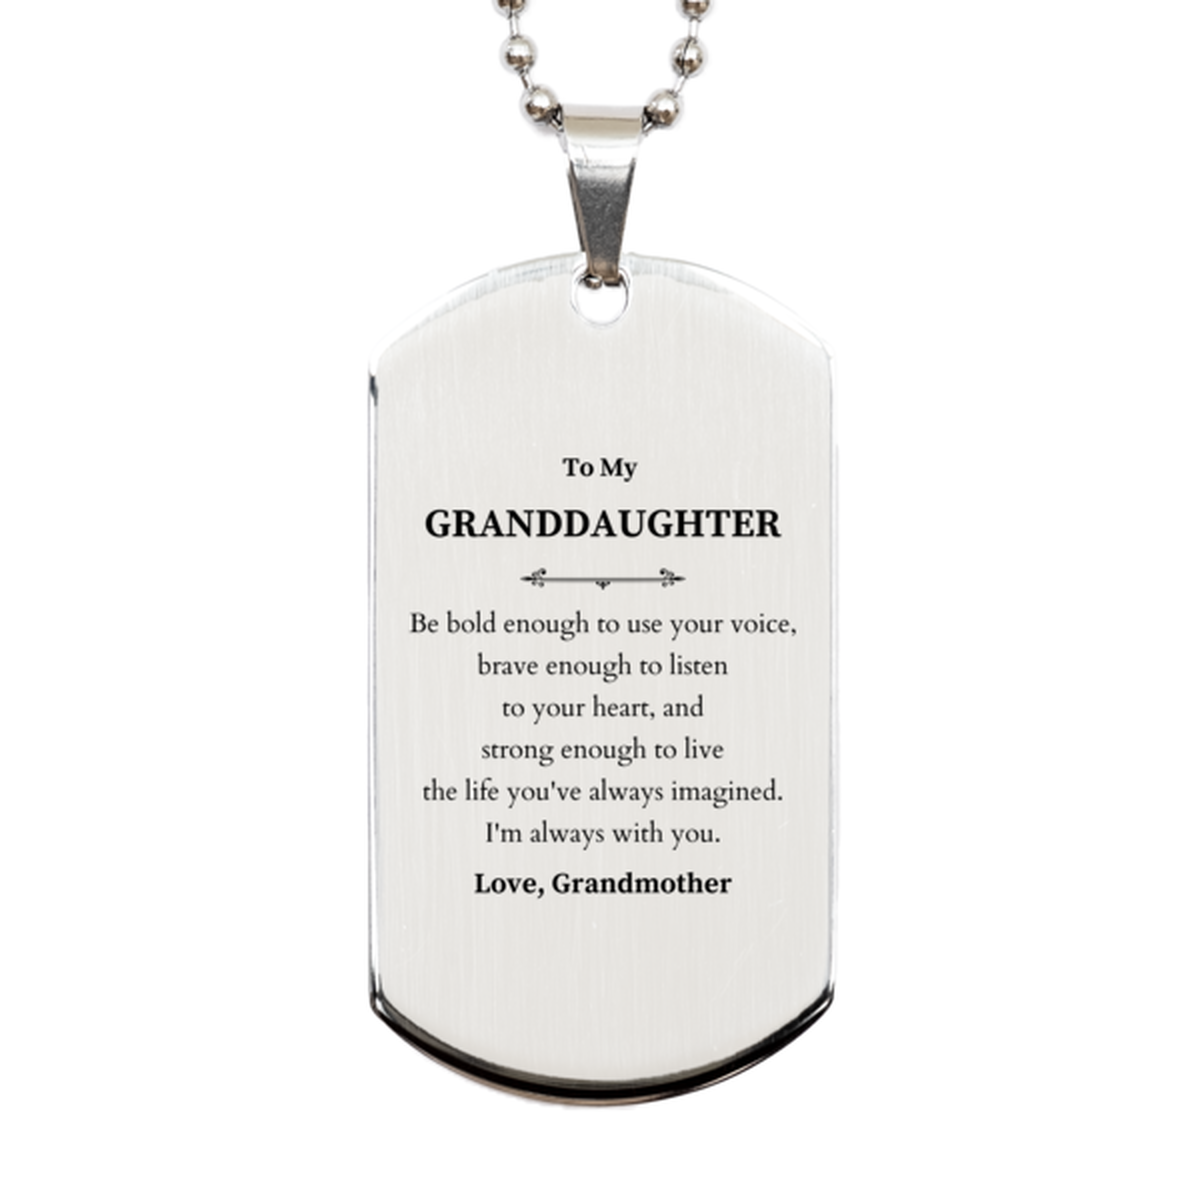 Keepsake Granddaughter Silver Dog Tag Gift Idea Graduation Christmas Birthday Granddaughter from Grandmother, Granddaughter Be bold enough to use your voice, brave enough to listen to your heart. Love, Grandmother